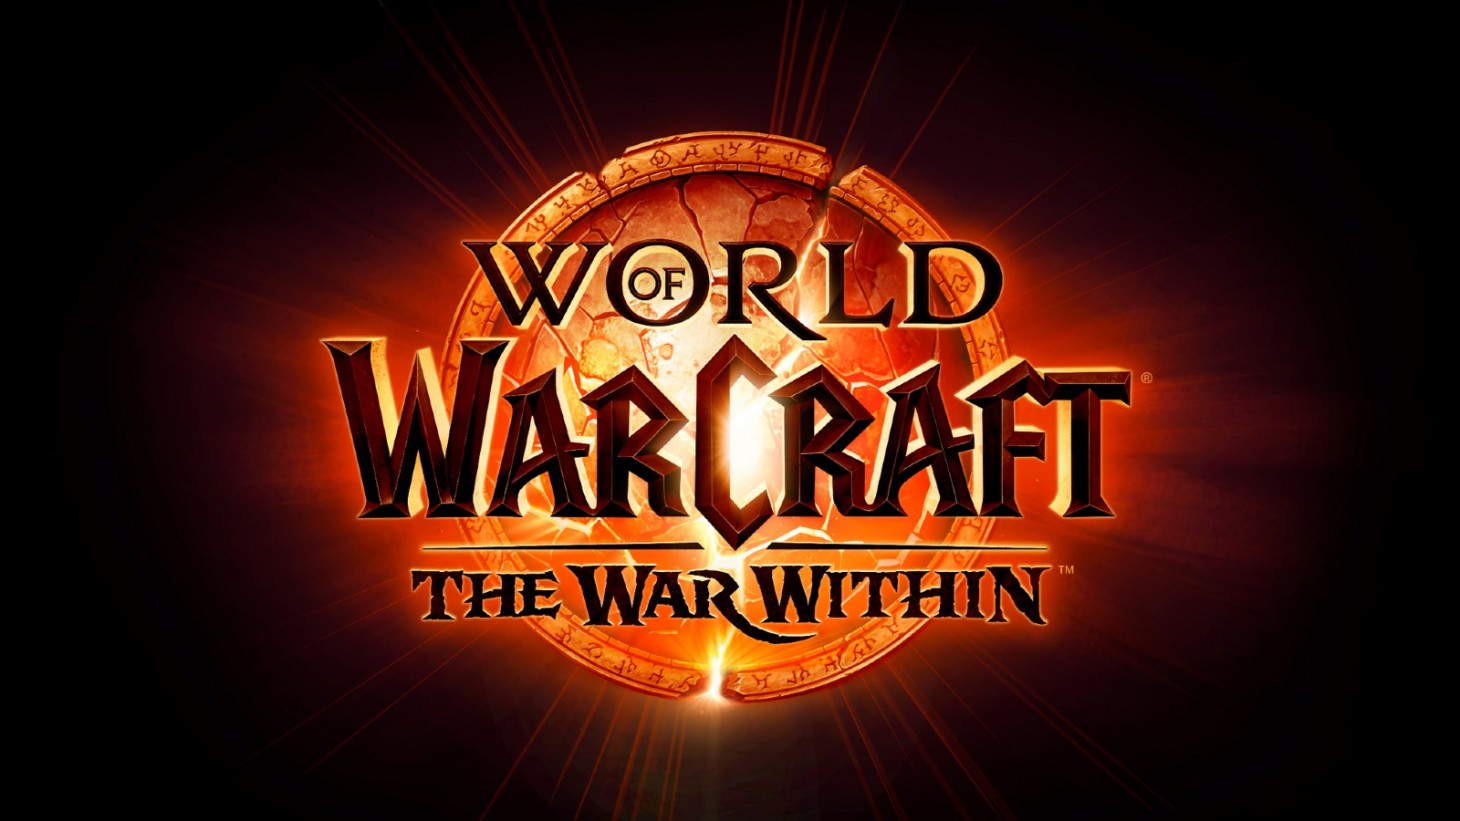 Exciting Changes Coming to World of Warcraft in The War Within